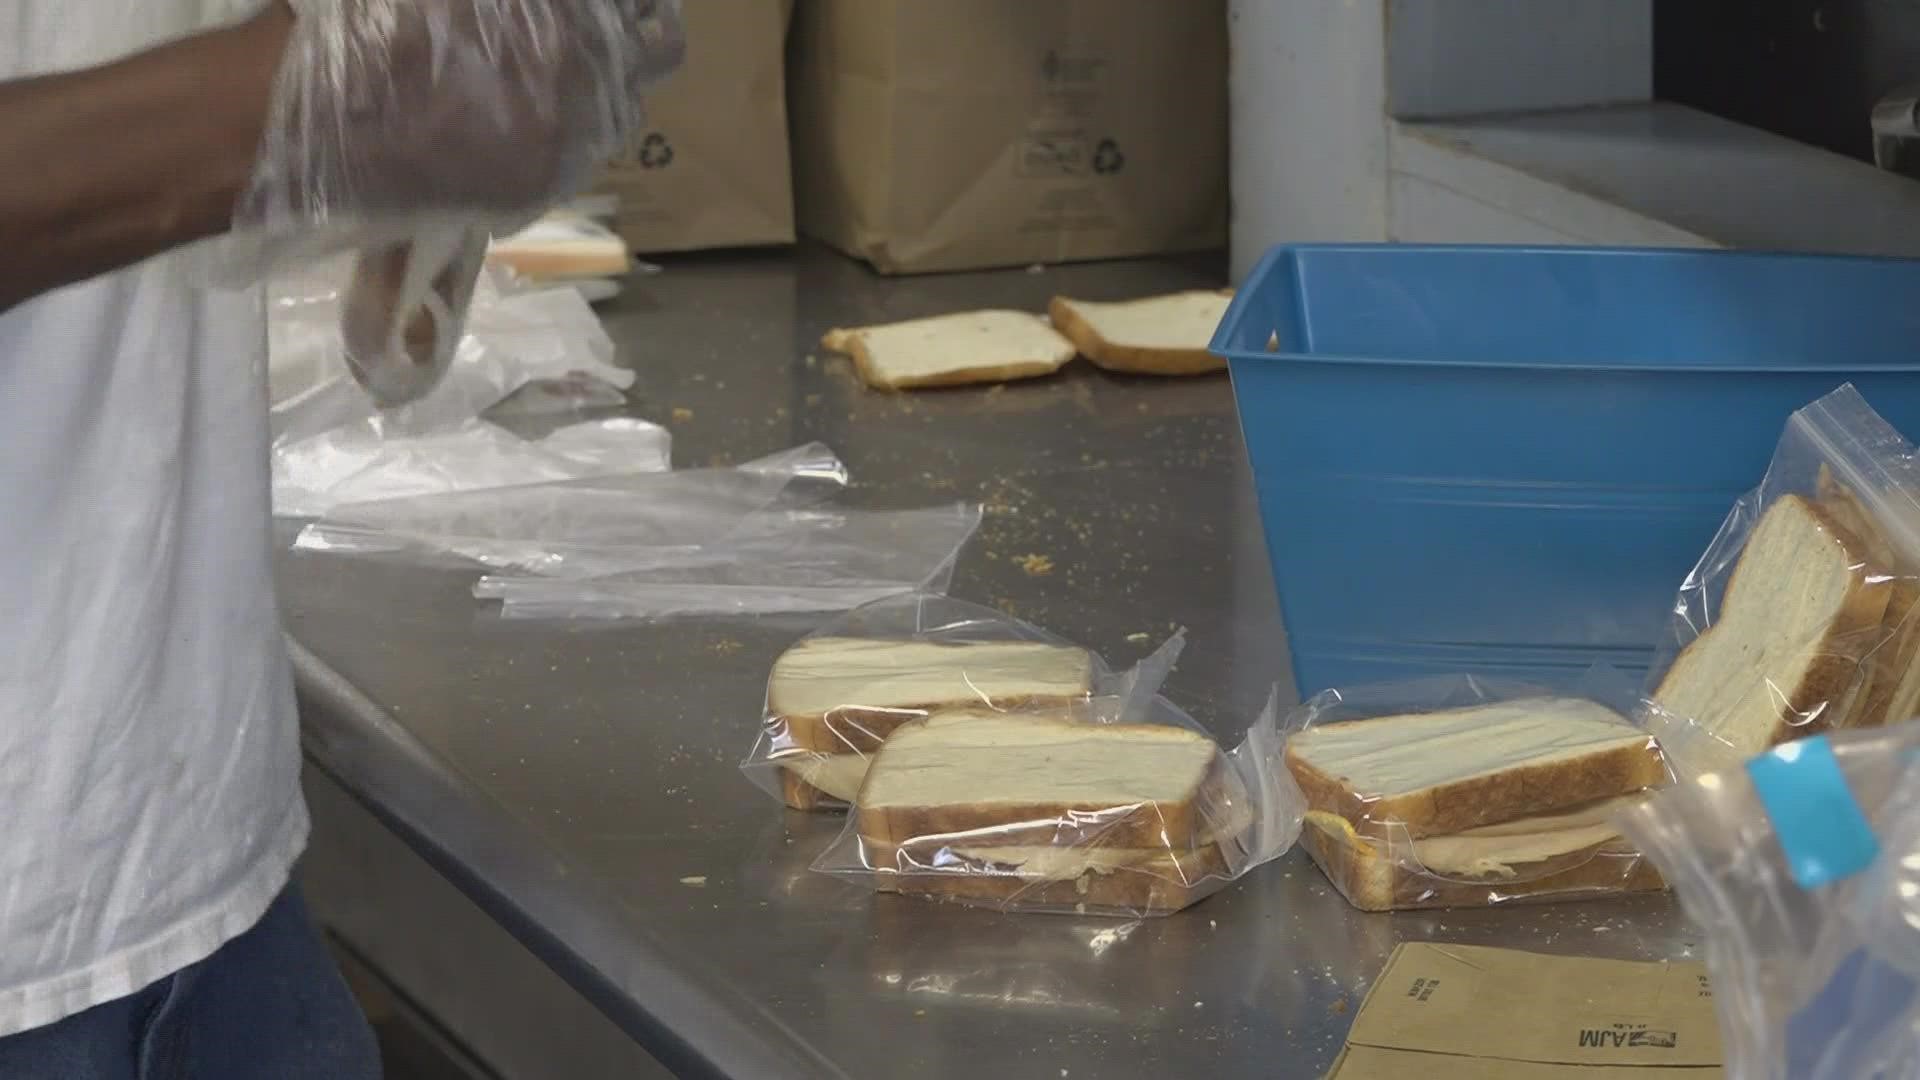 Several local businesses, faith groups, and individuals are helping the shelter keep supplying those it serves with the food they need while the kitchen is closed.